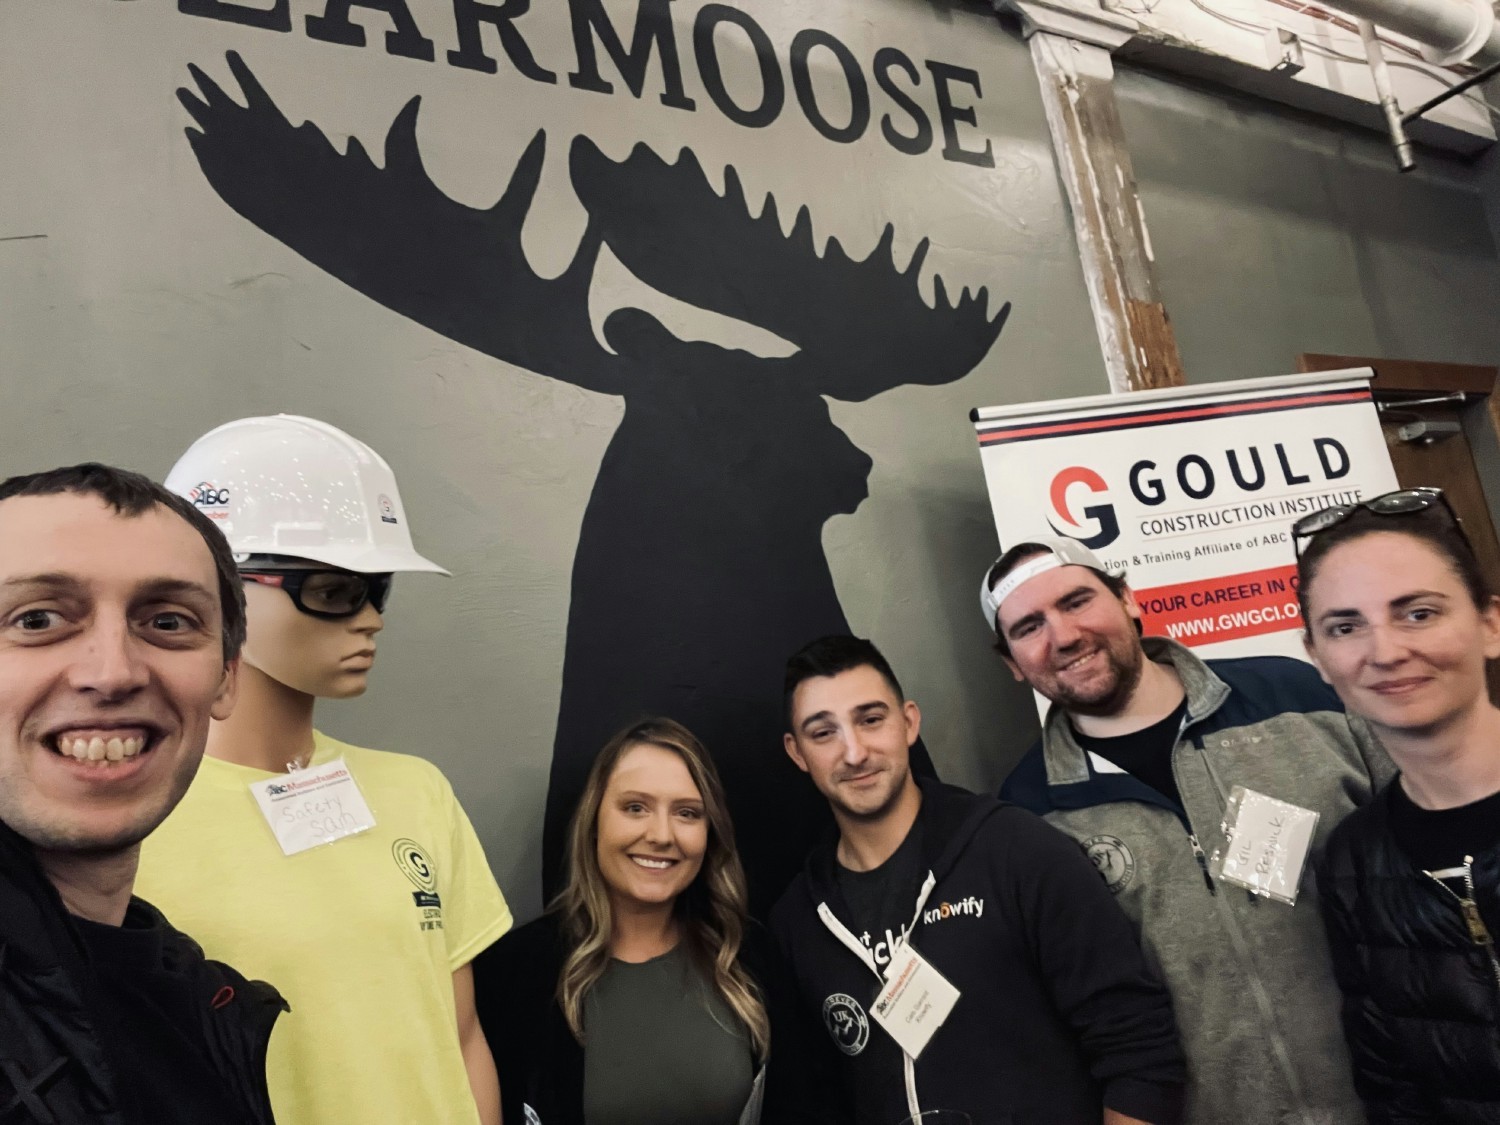 The Knowify team hangs out with folks from ABC MA at Bear Moose Brewing in Everett, Massachusetts.